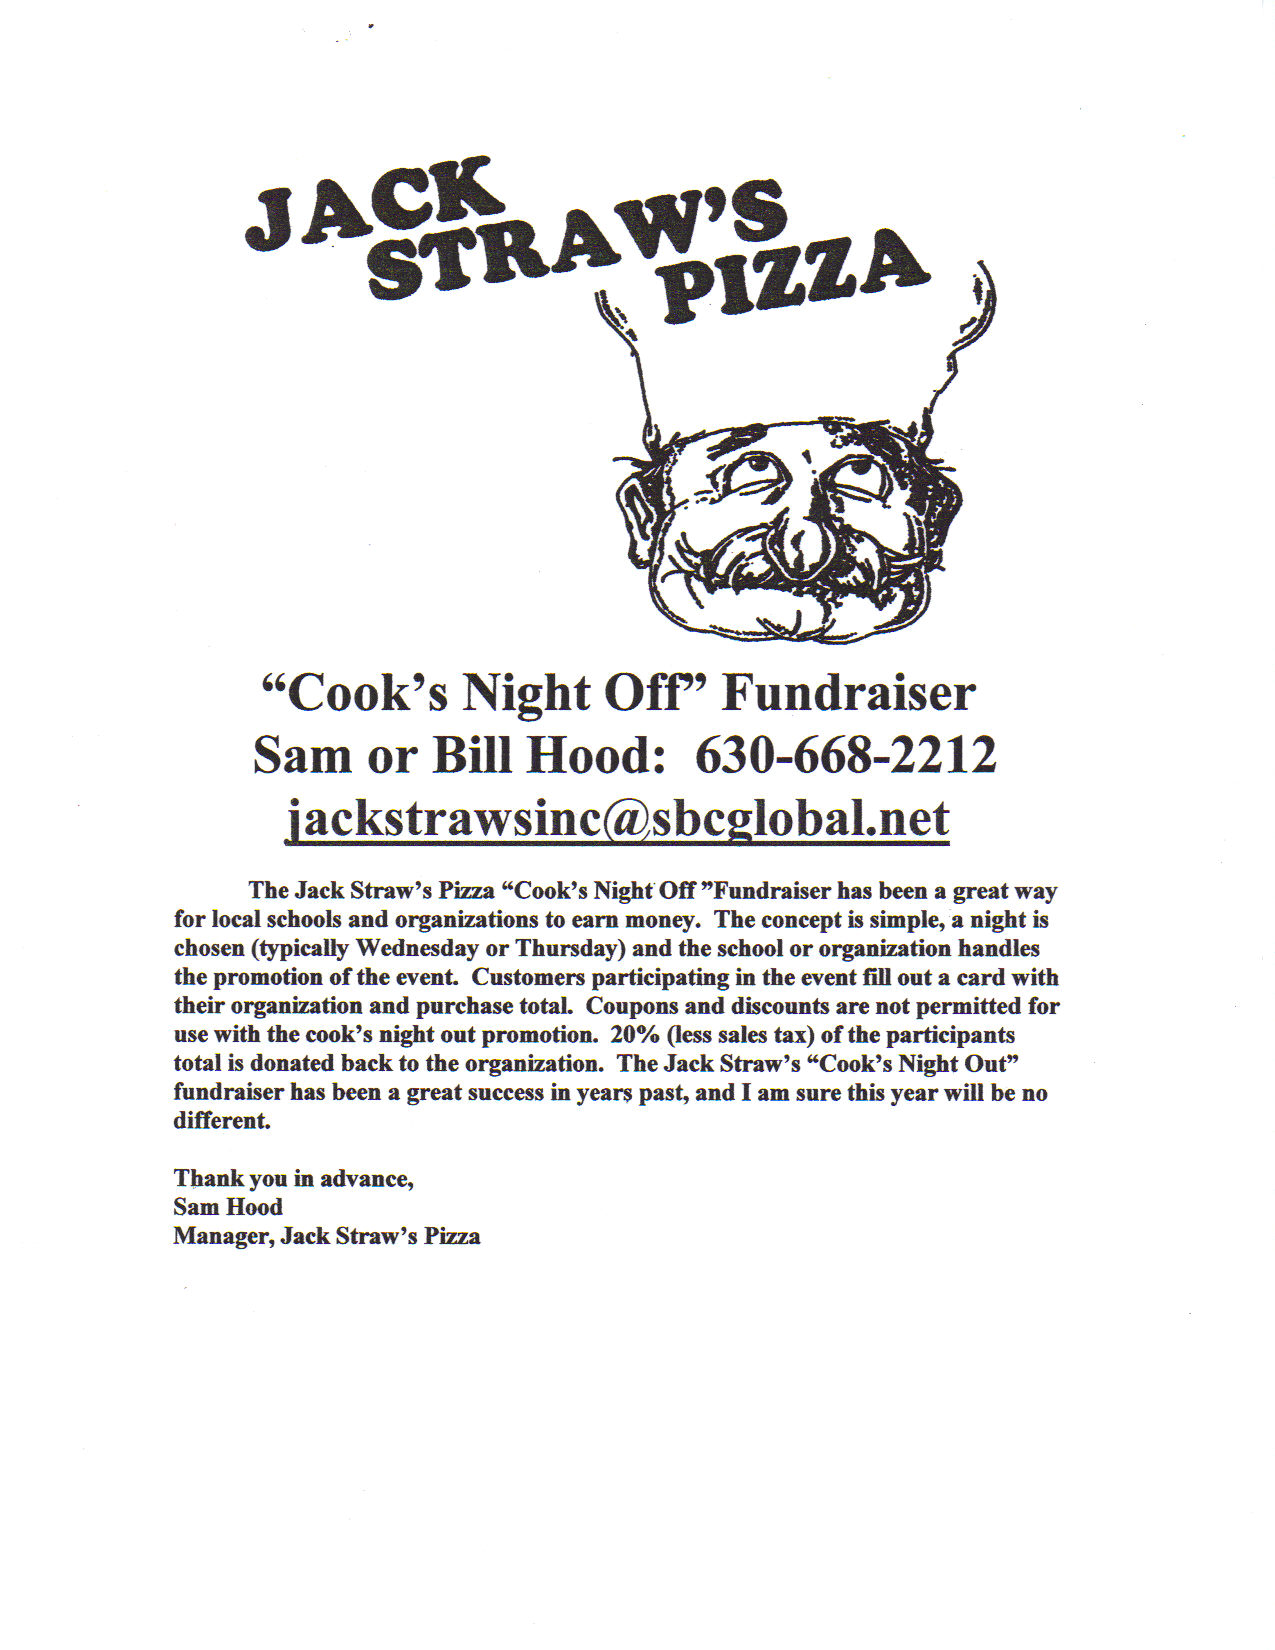 jack, straw, straws, straw's, pizza, wheaton, il, 60187, cook, cooks, cook's, nite, night, out, off, fundraiser, charity, event, lowell, school, saint, michals, mike, mikes, school, longfellow, school, night, emerson, school, night, nite, wheaton, christian, grammer, school, night, nite, whittier, school, lincoln, school, cooks, nite, out, off, fundraiser, charity, church, fundraiser, opportunity, school, fundraiser, opportunity, easy, fundraiser, fundraiser, sports, chicago, fire, jrs, juniors, soccer